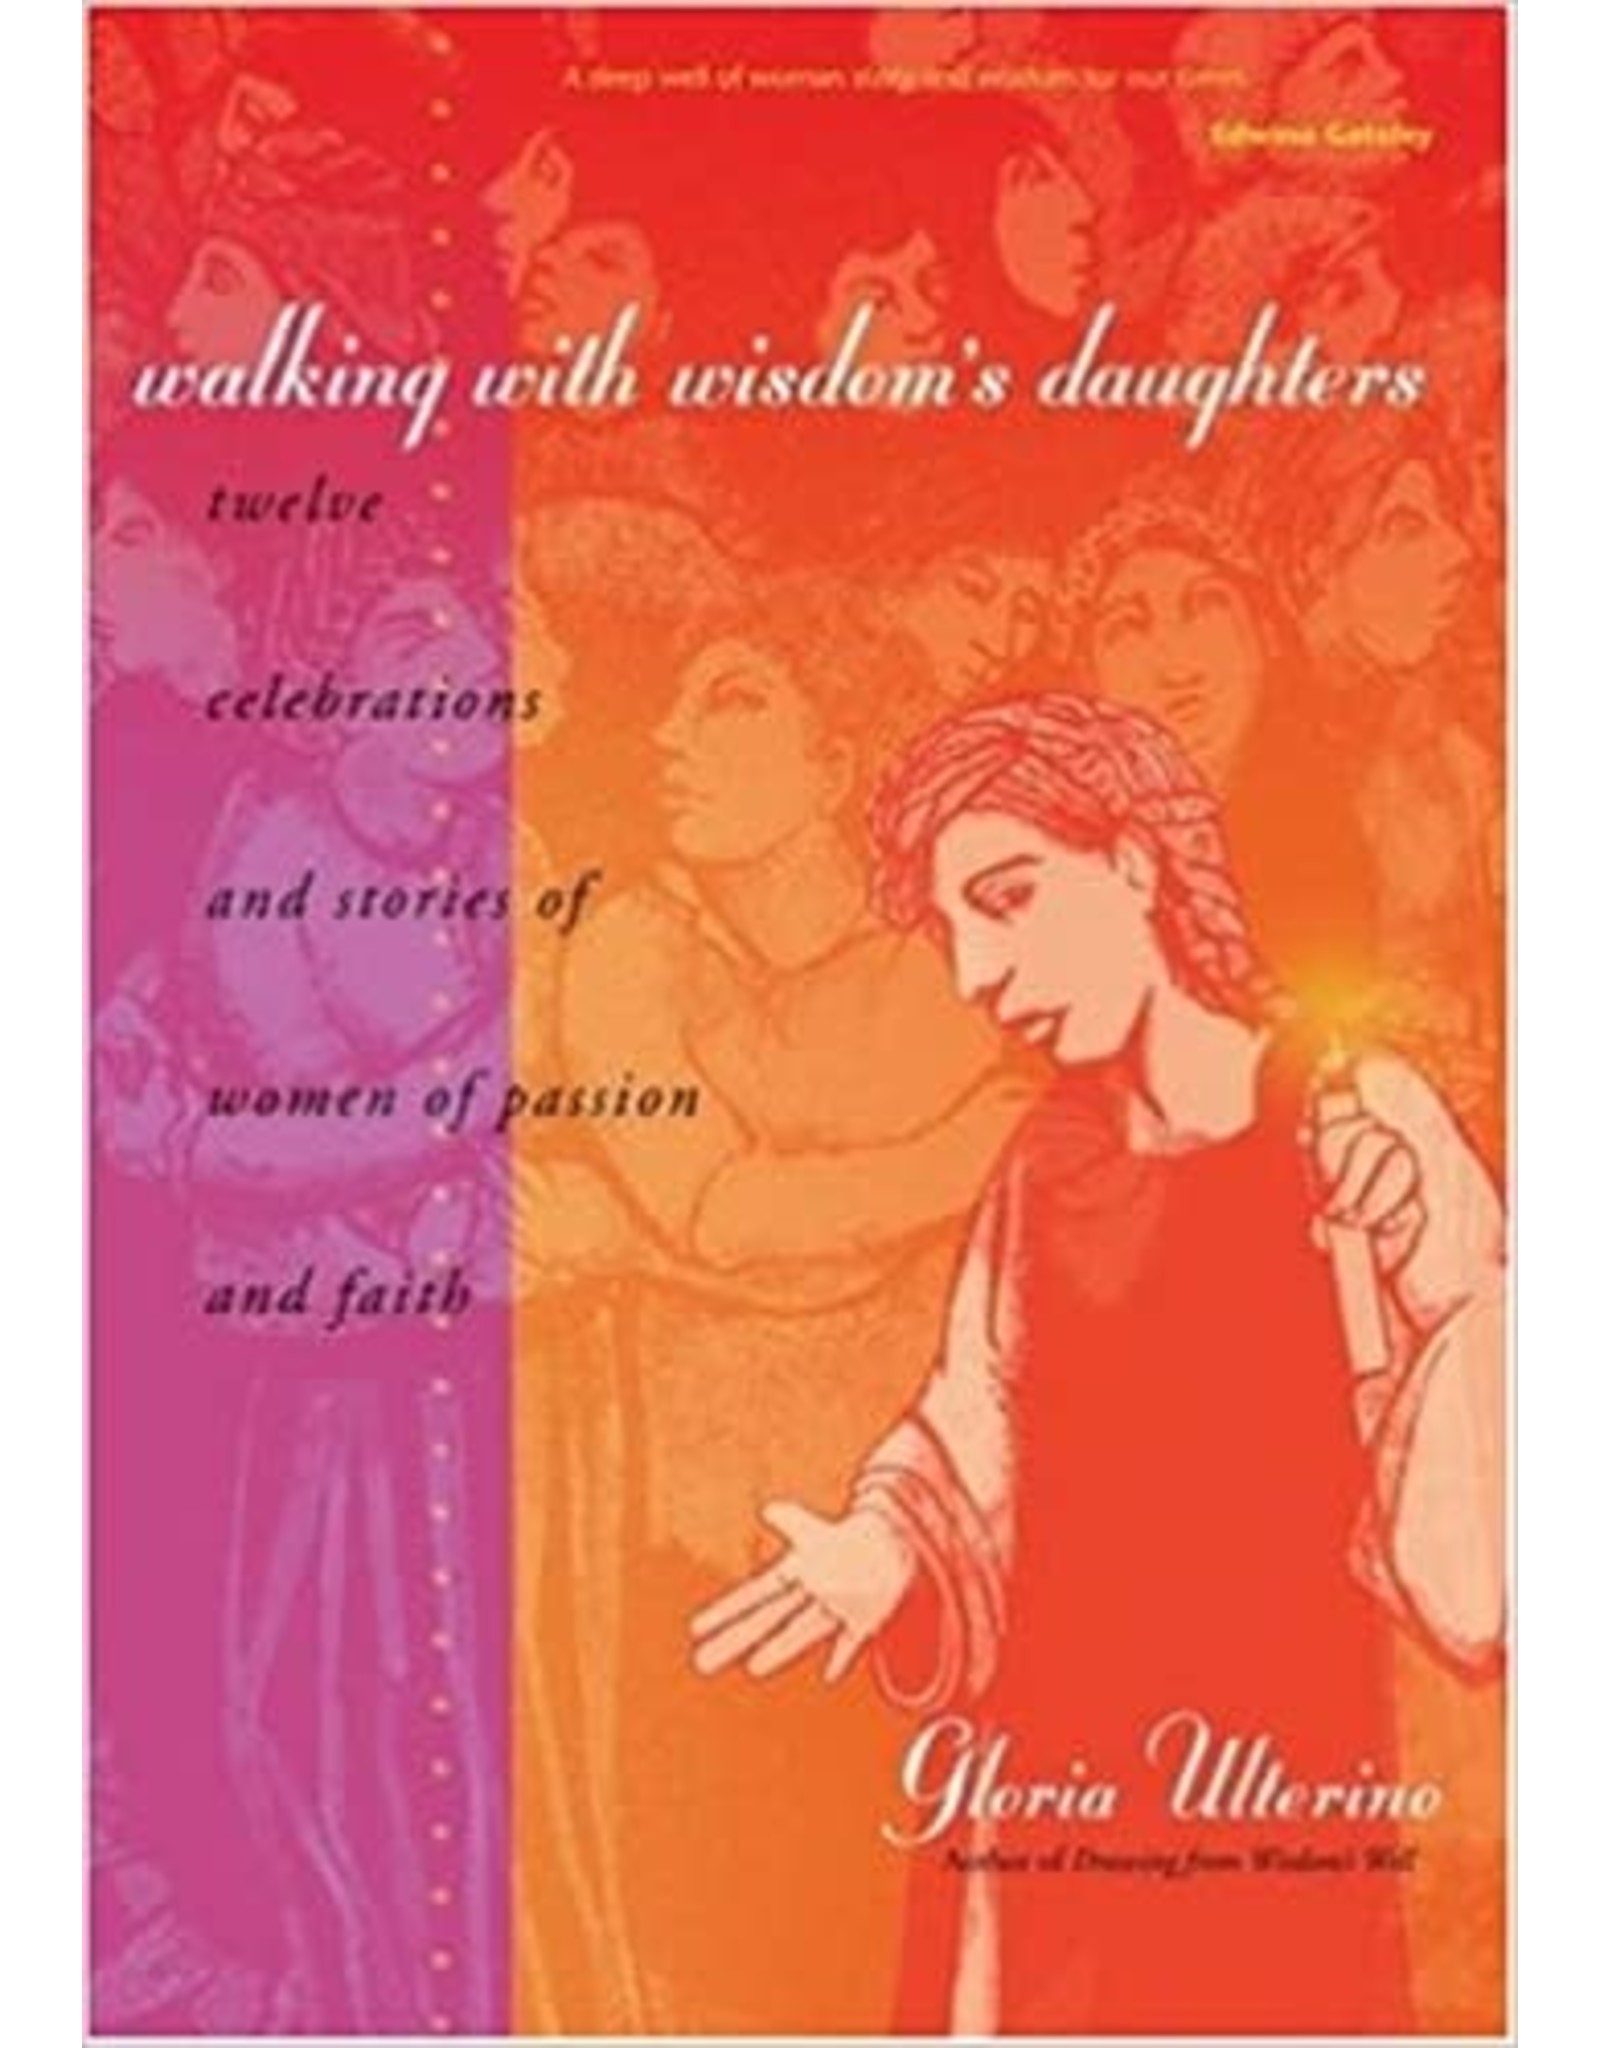 Ave Maria Walking with Wisdom's Daughters: Twelve Celebrations and Stories of Women of Passion and Faith